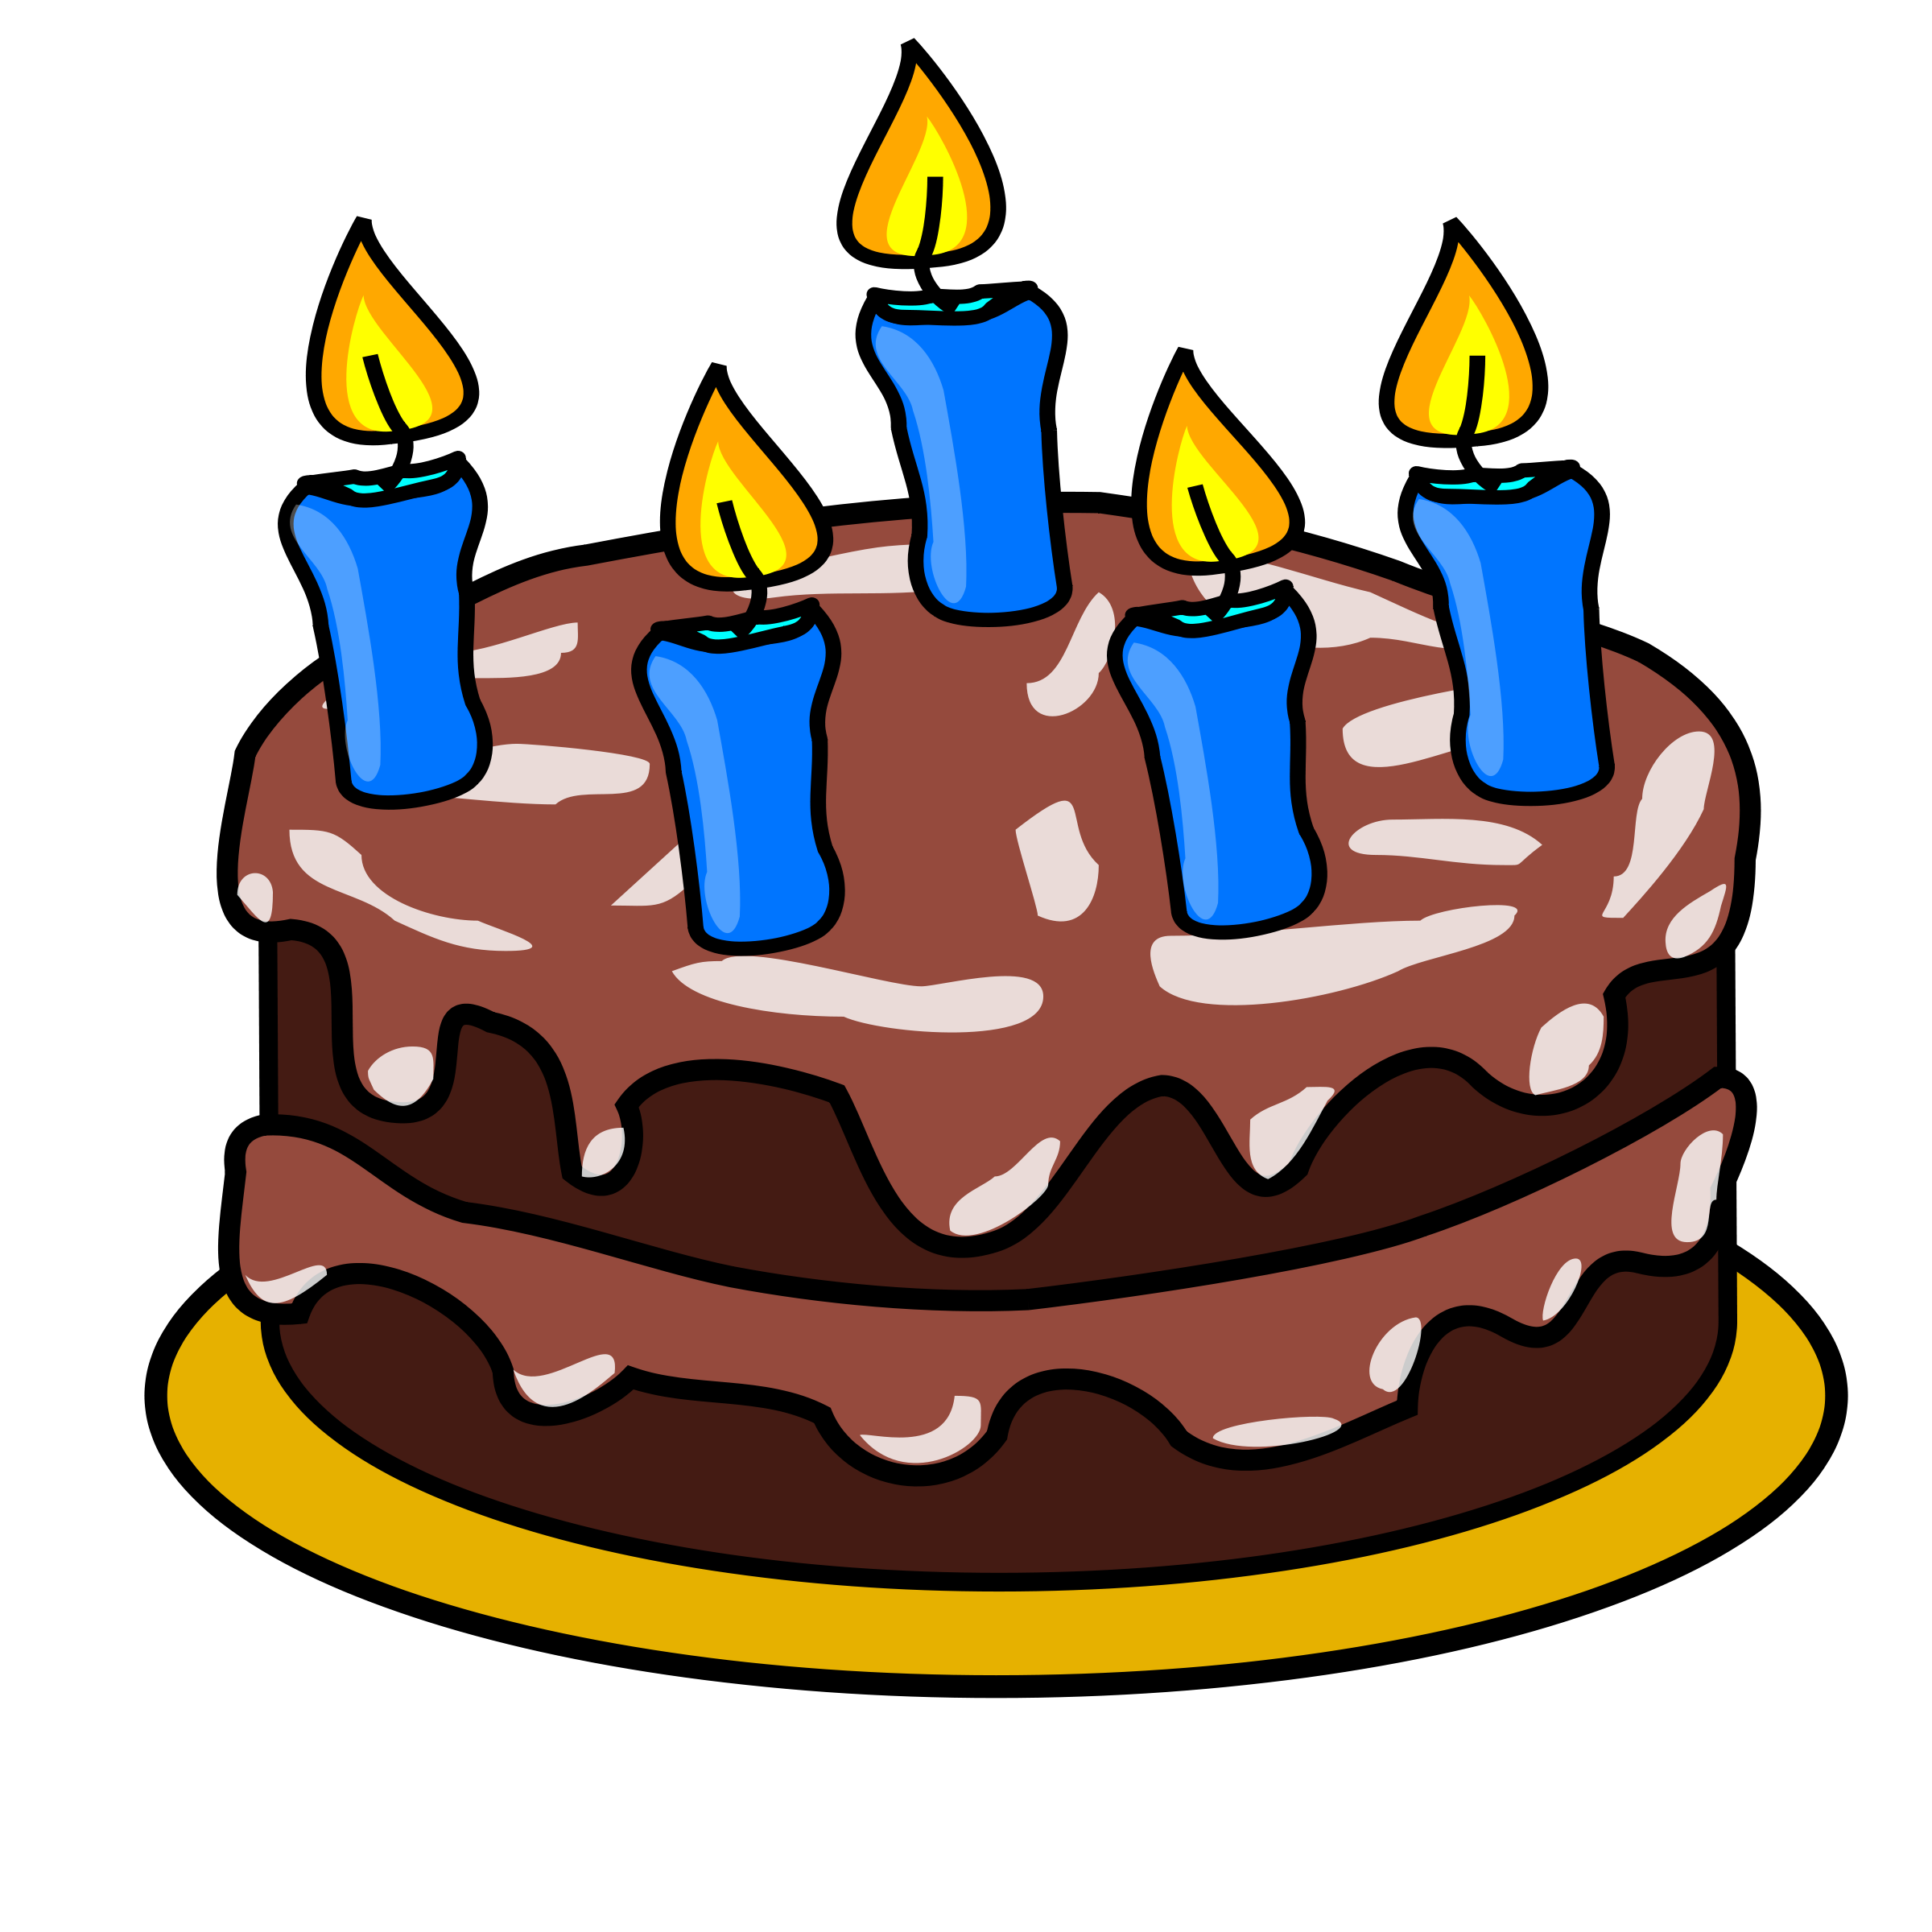 Birthday Cake Clip Art Images Pictures and Poems | 2! Happy Birthday